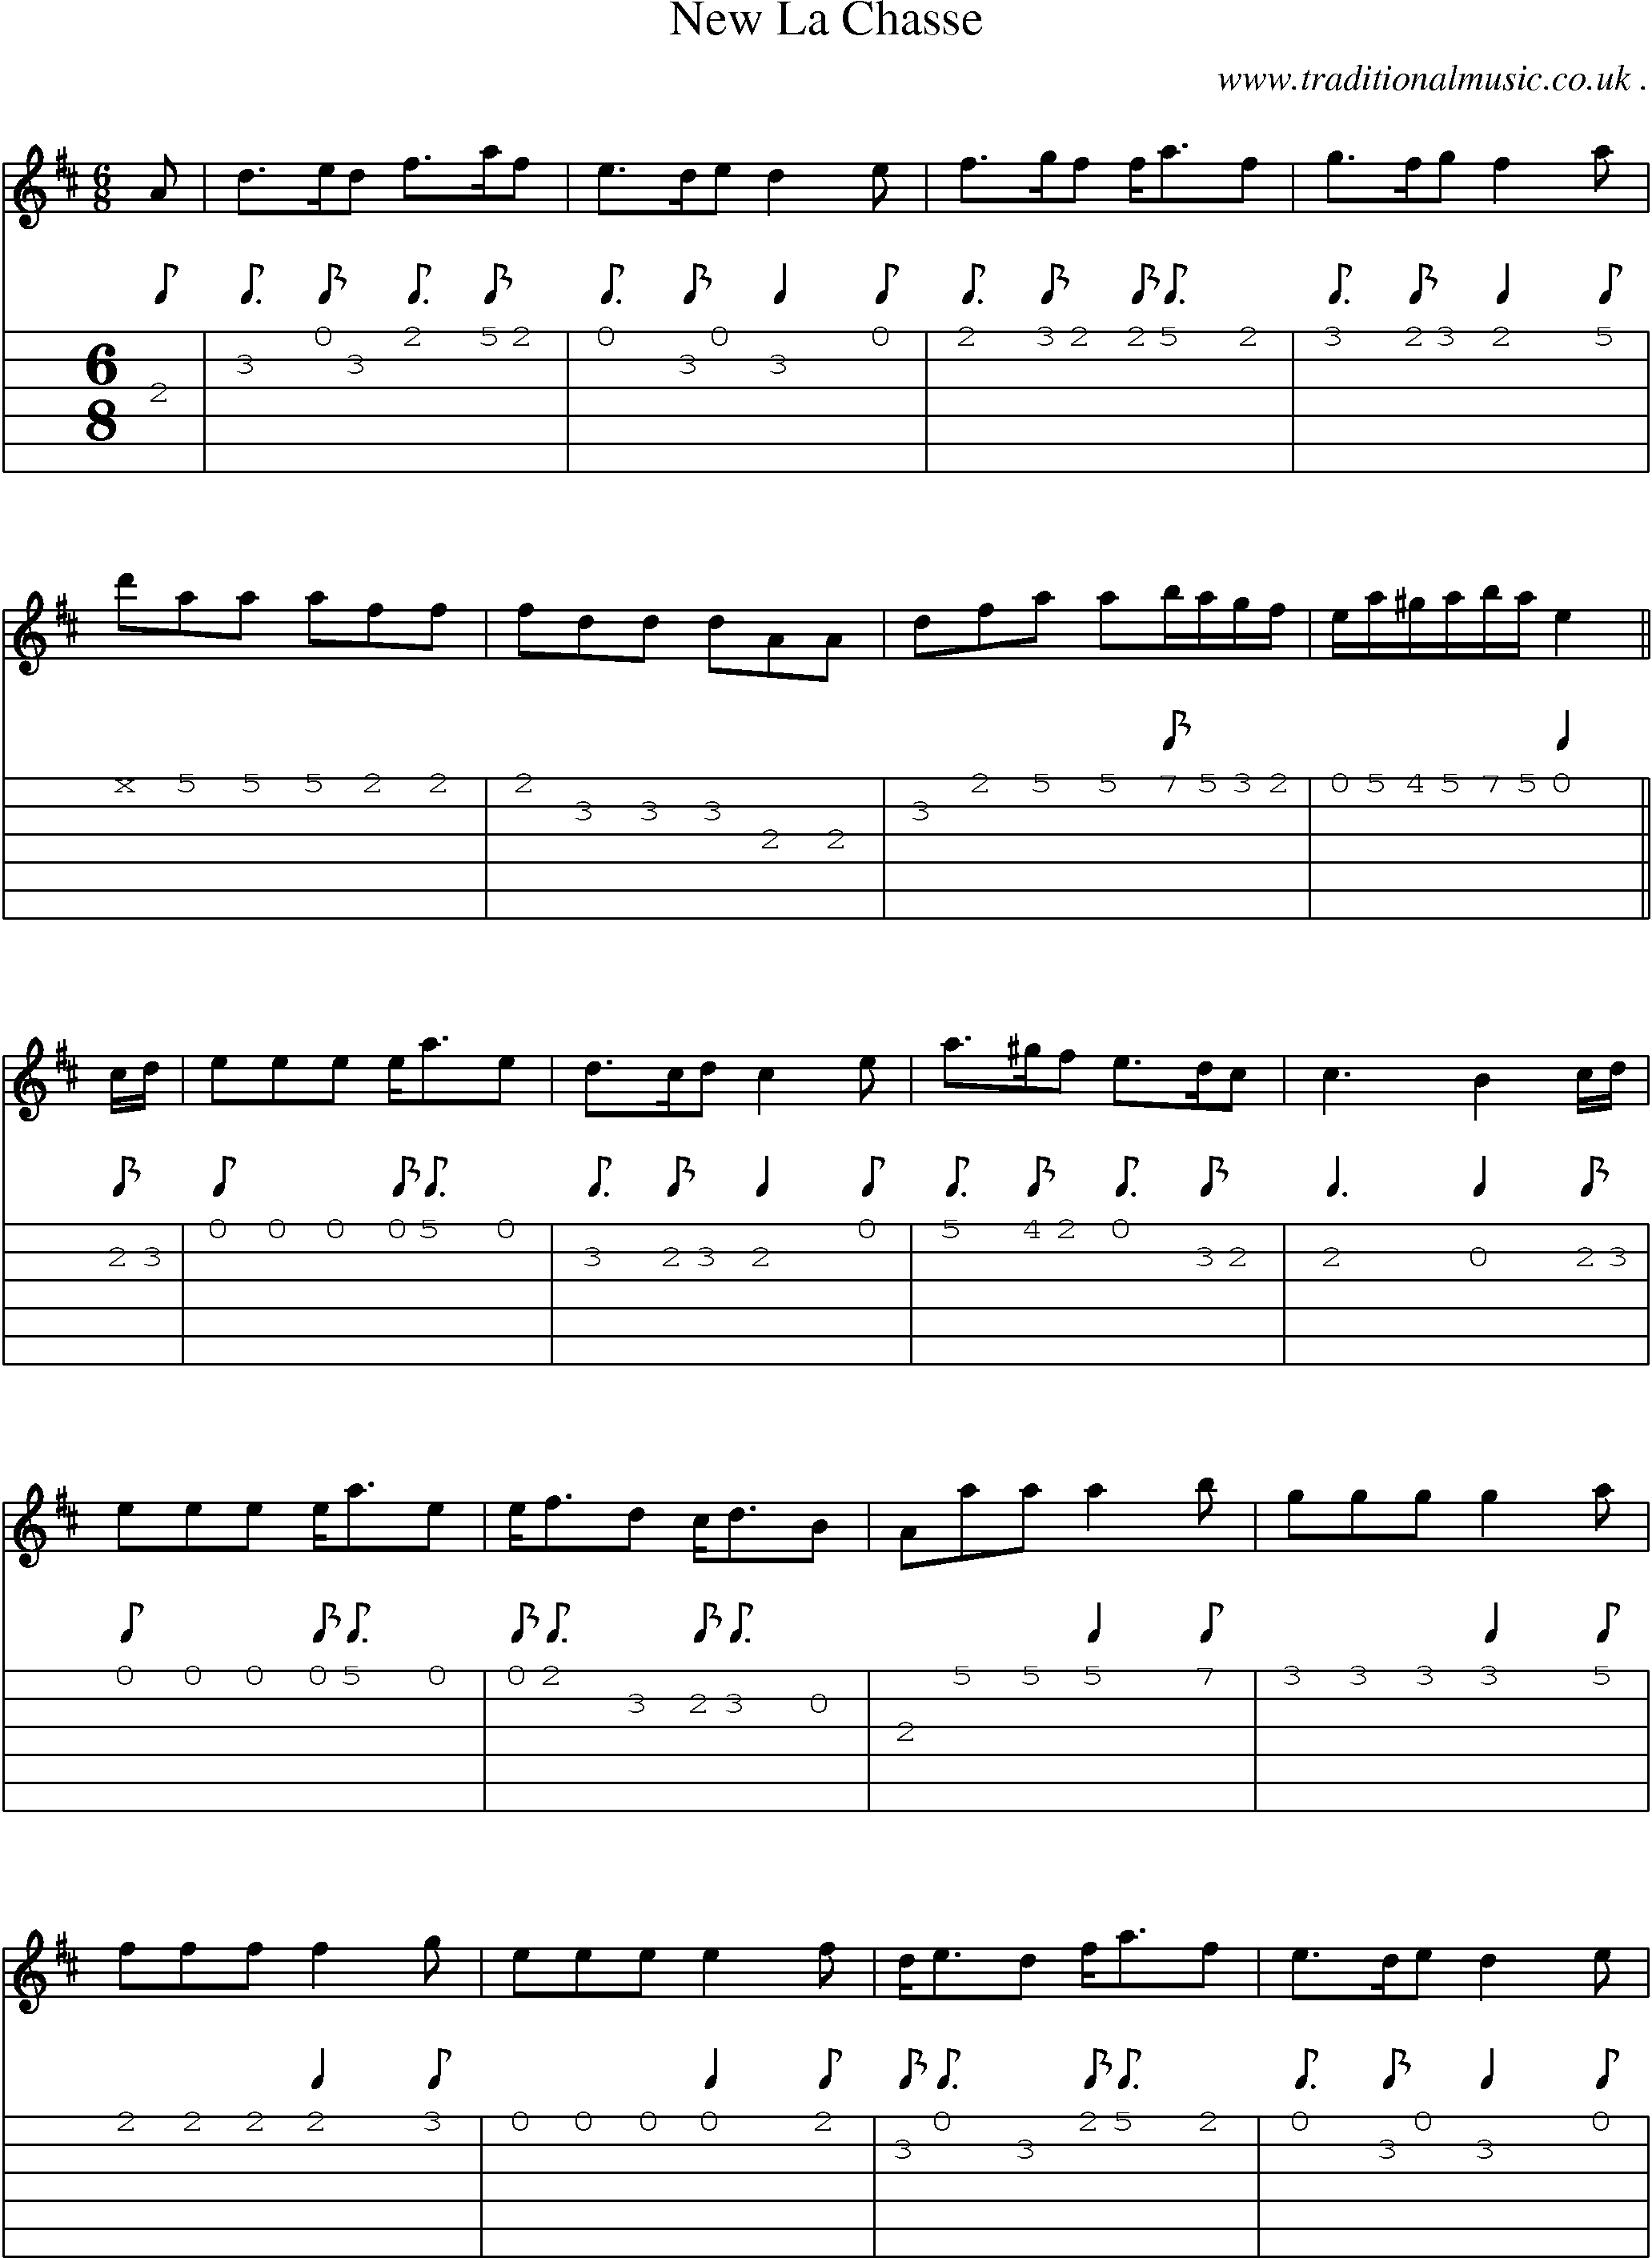 Sheet-Music and Guitar Tabs for New La Chasse